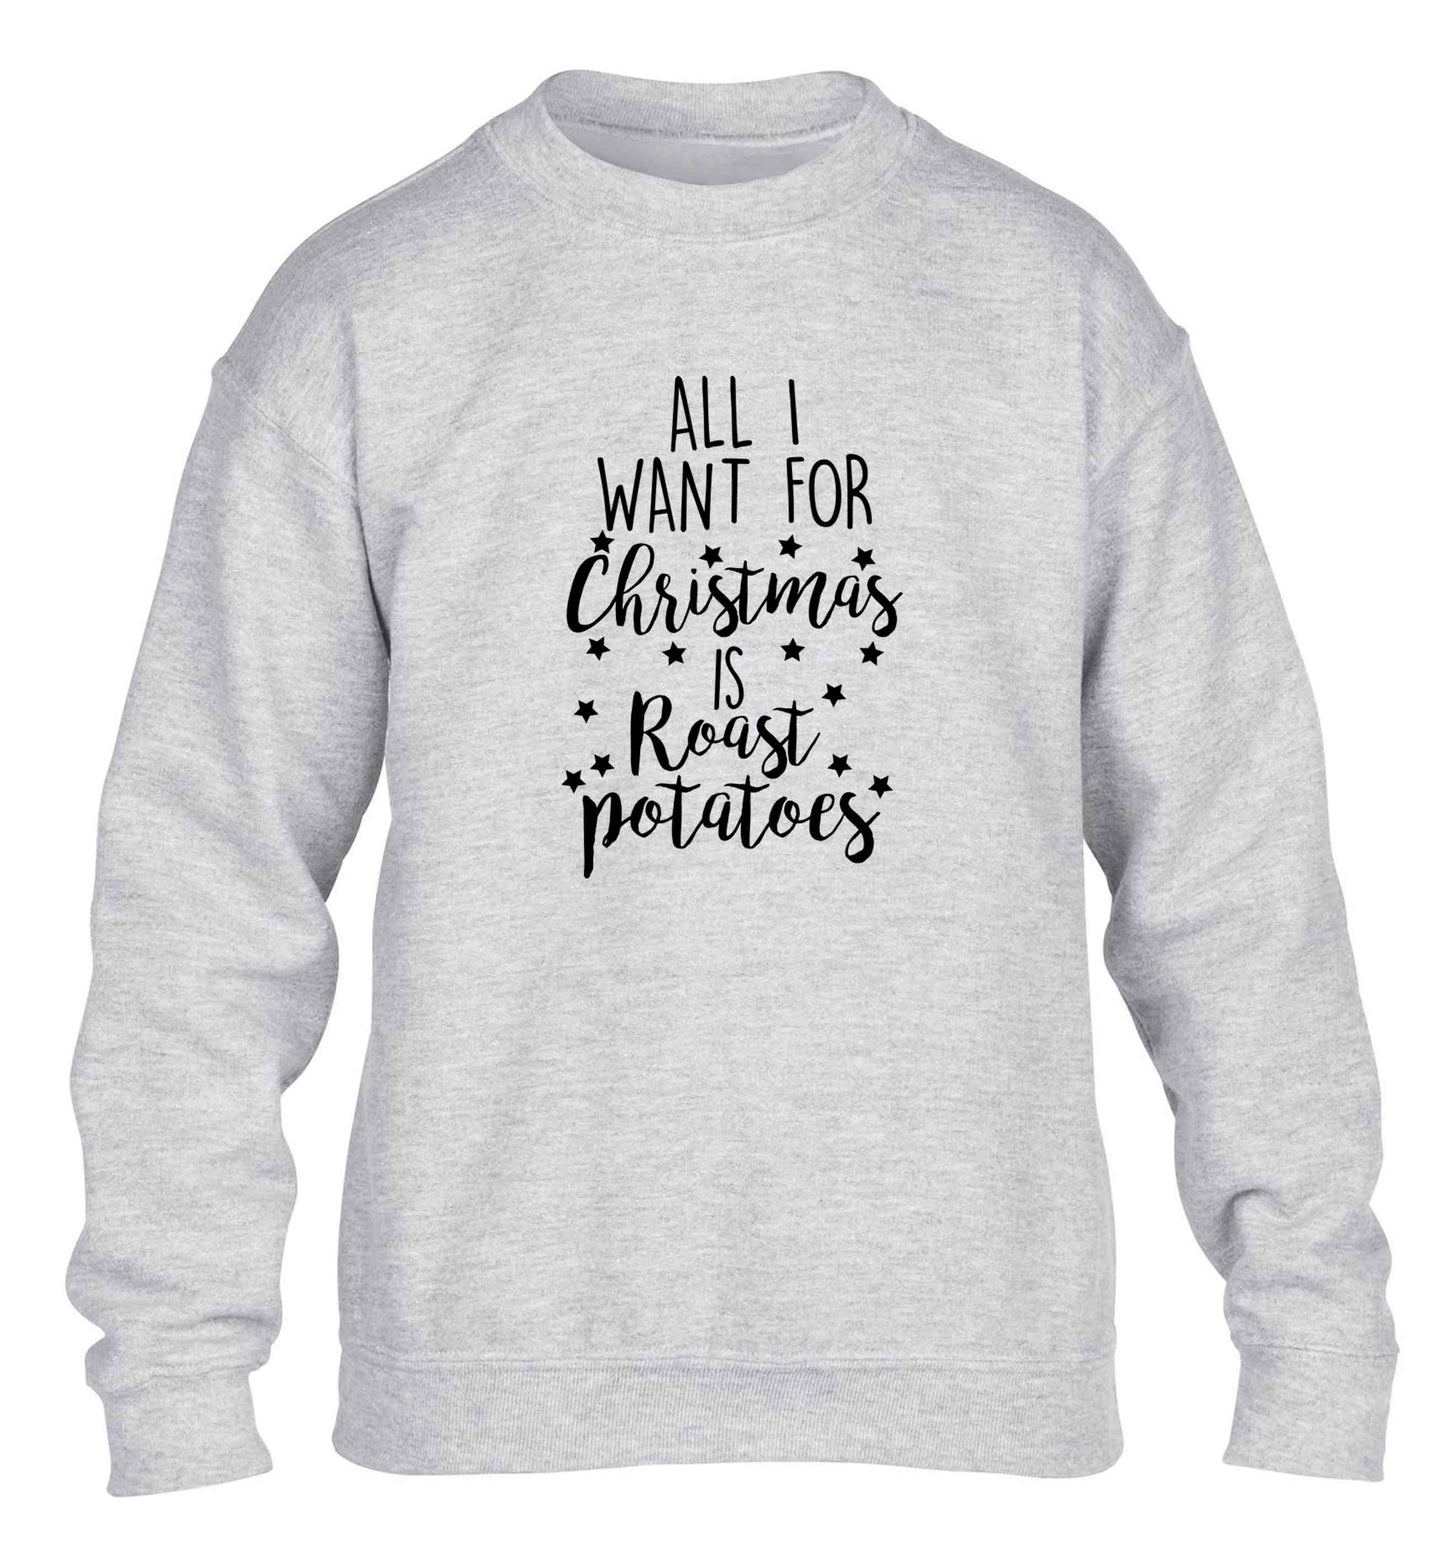 All I want for Christmas is roast potatoes children's grey sweater 12-13 Years